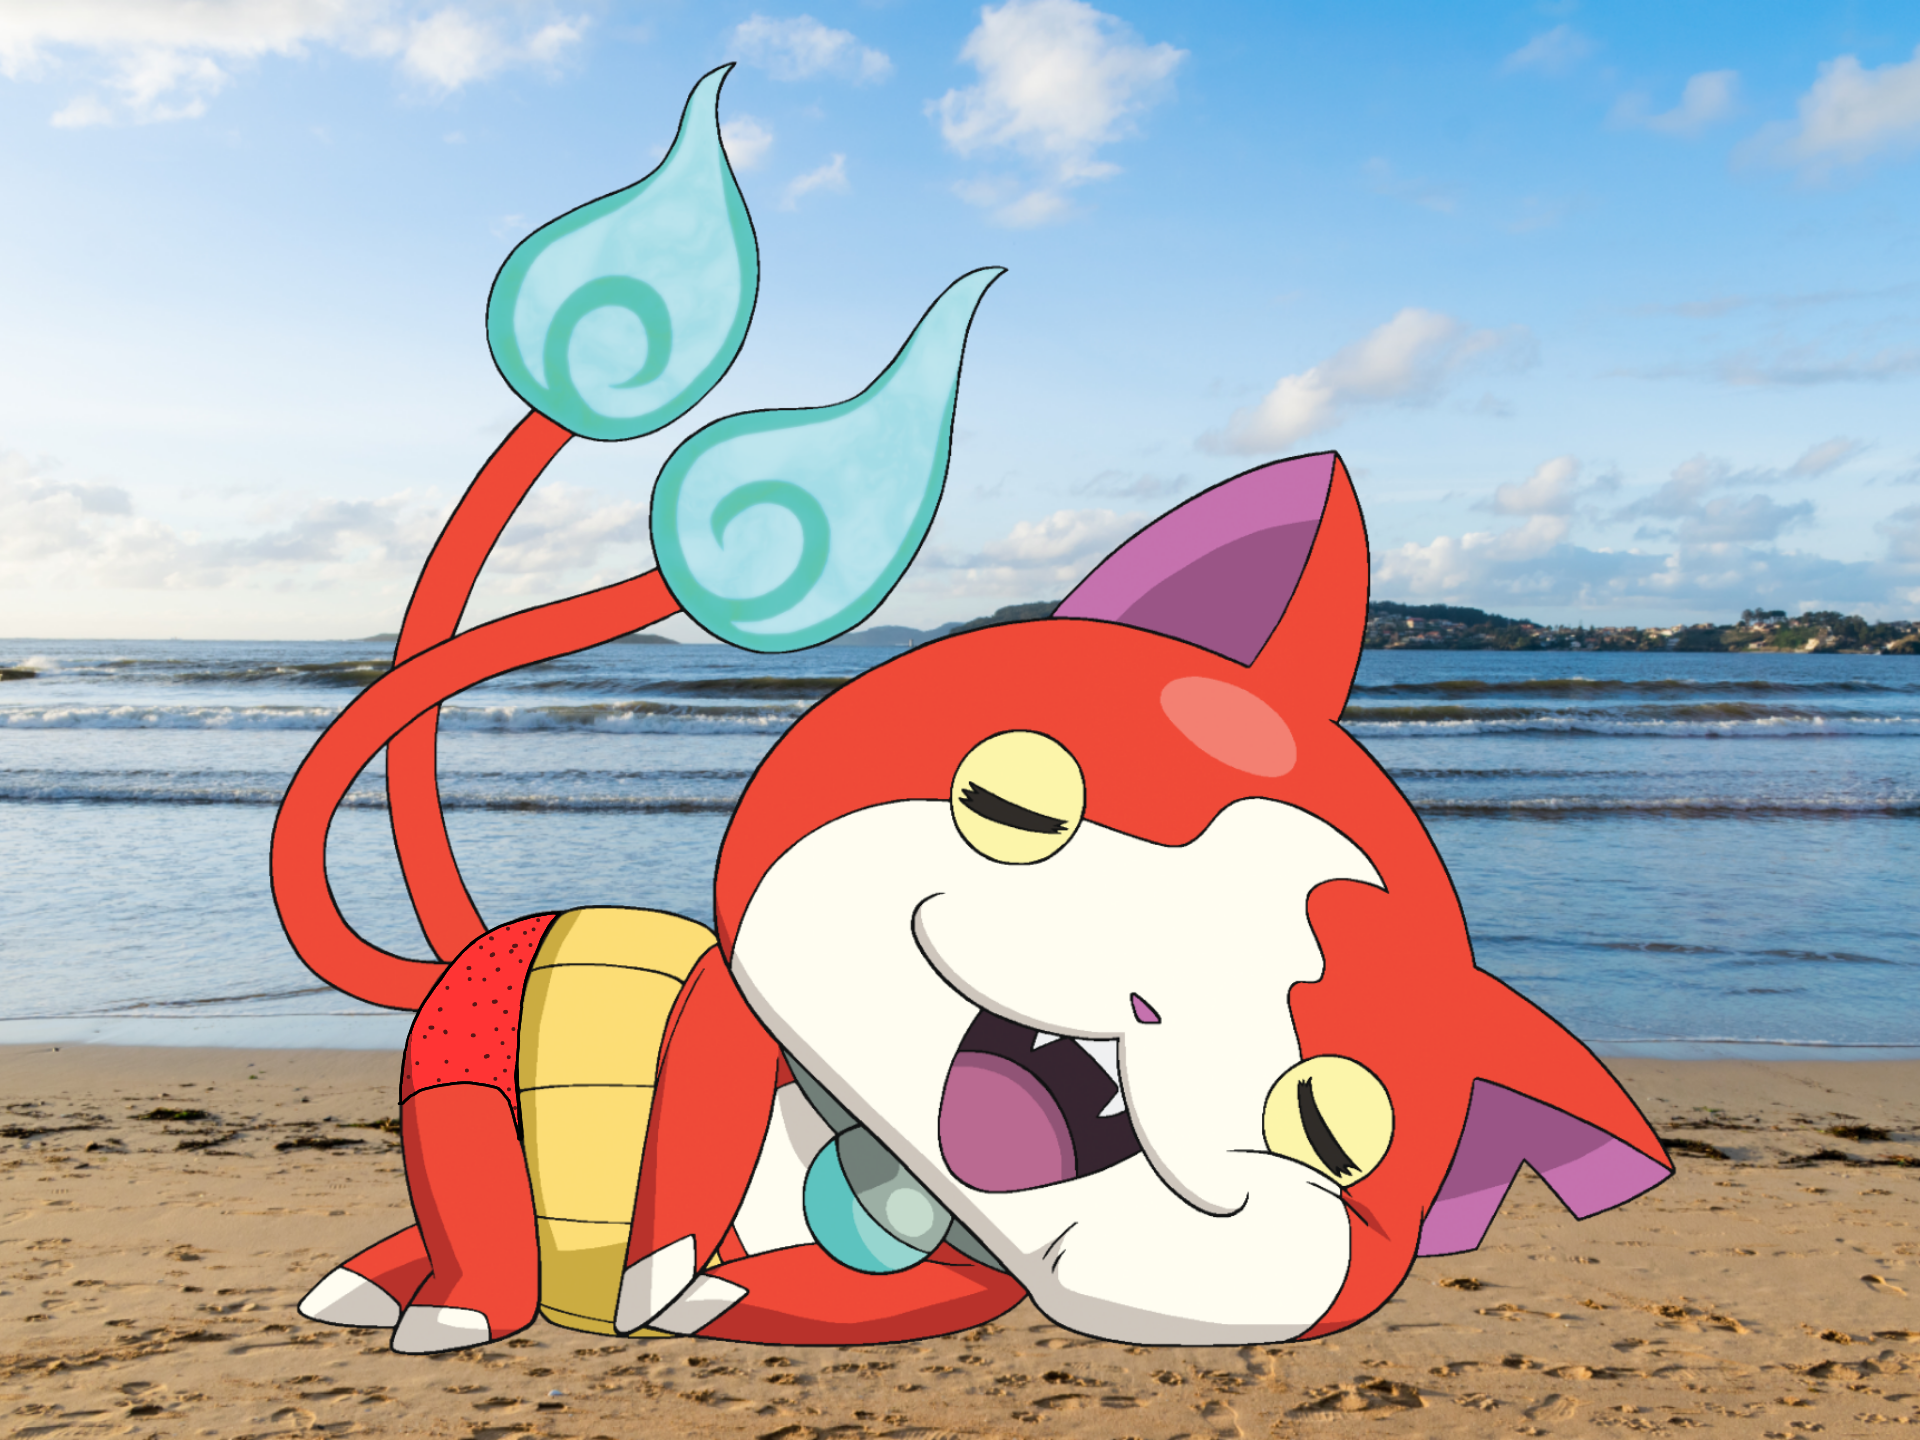 Jibanyan with Red Speedo Swimsuit Dreaming by SERGIBLUEBIRD16 on